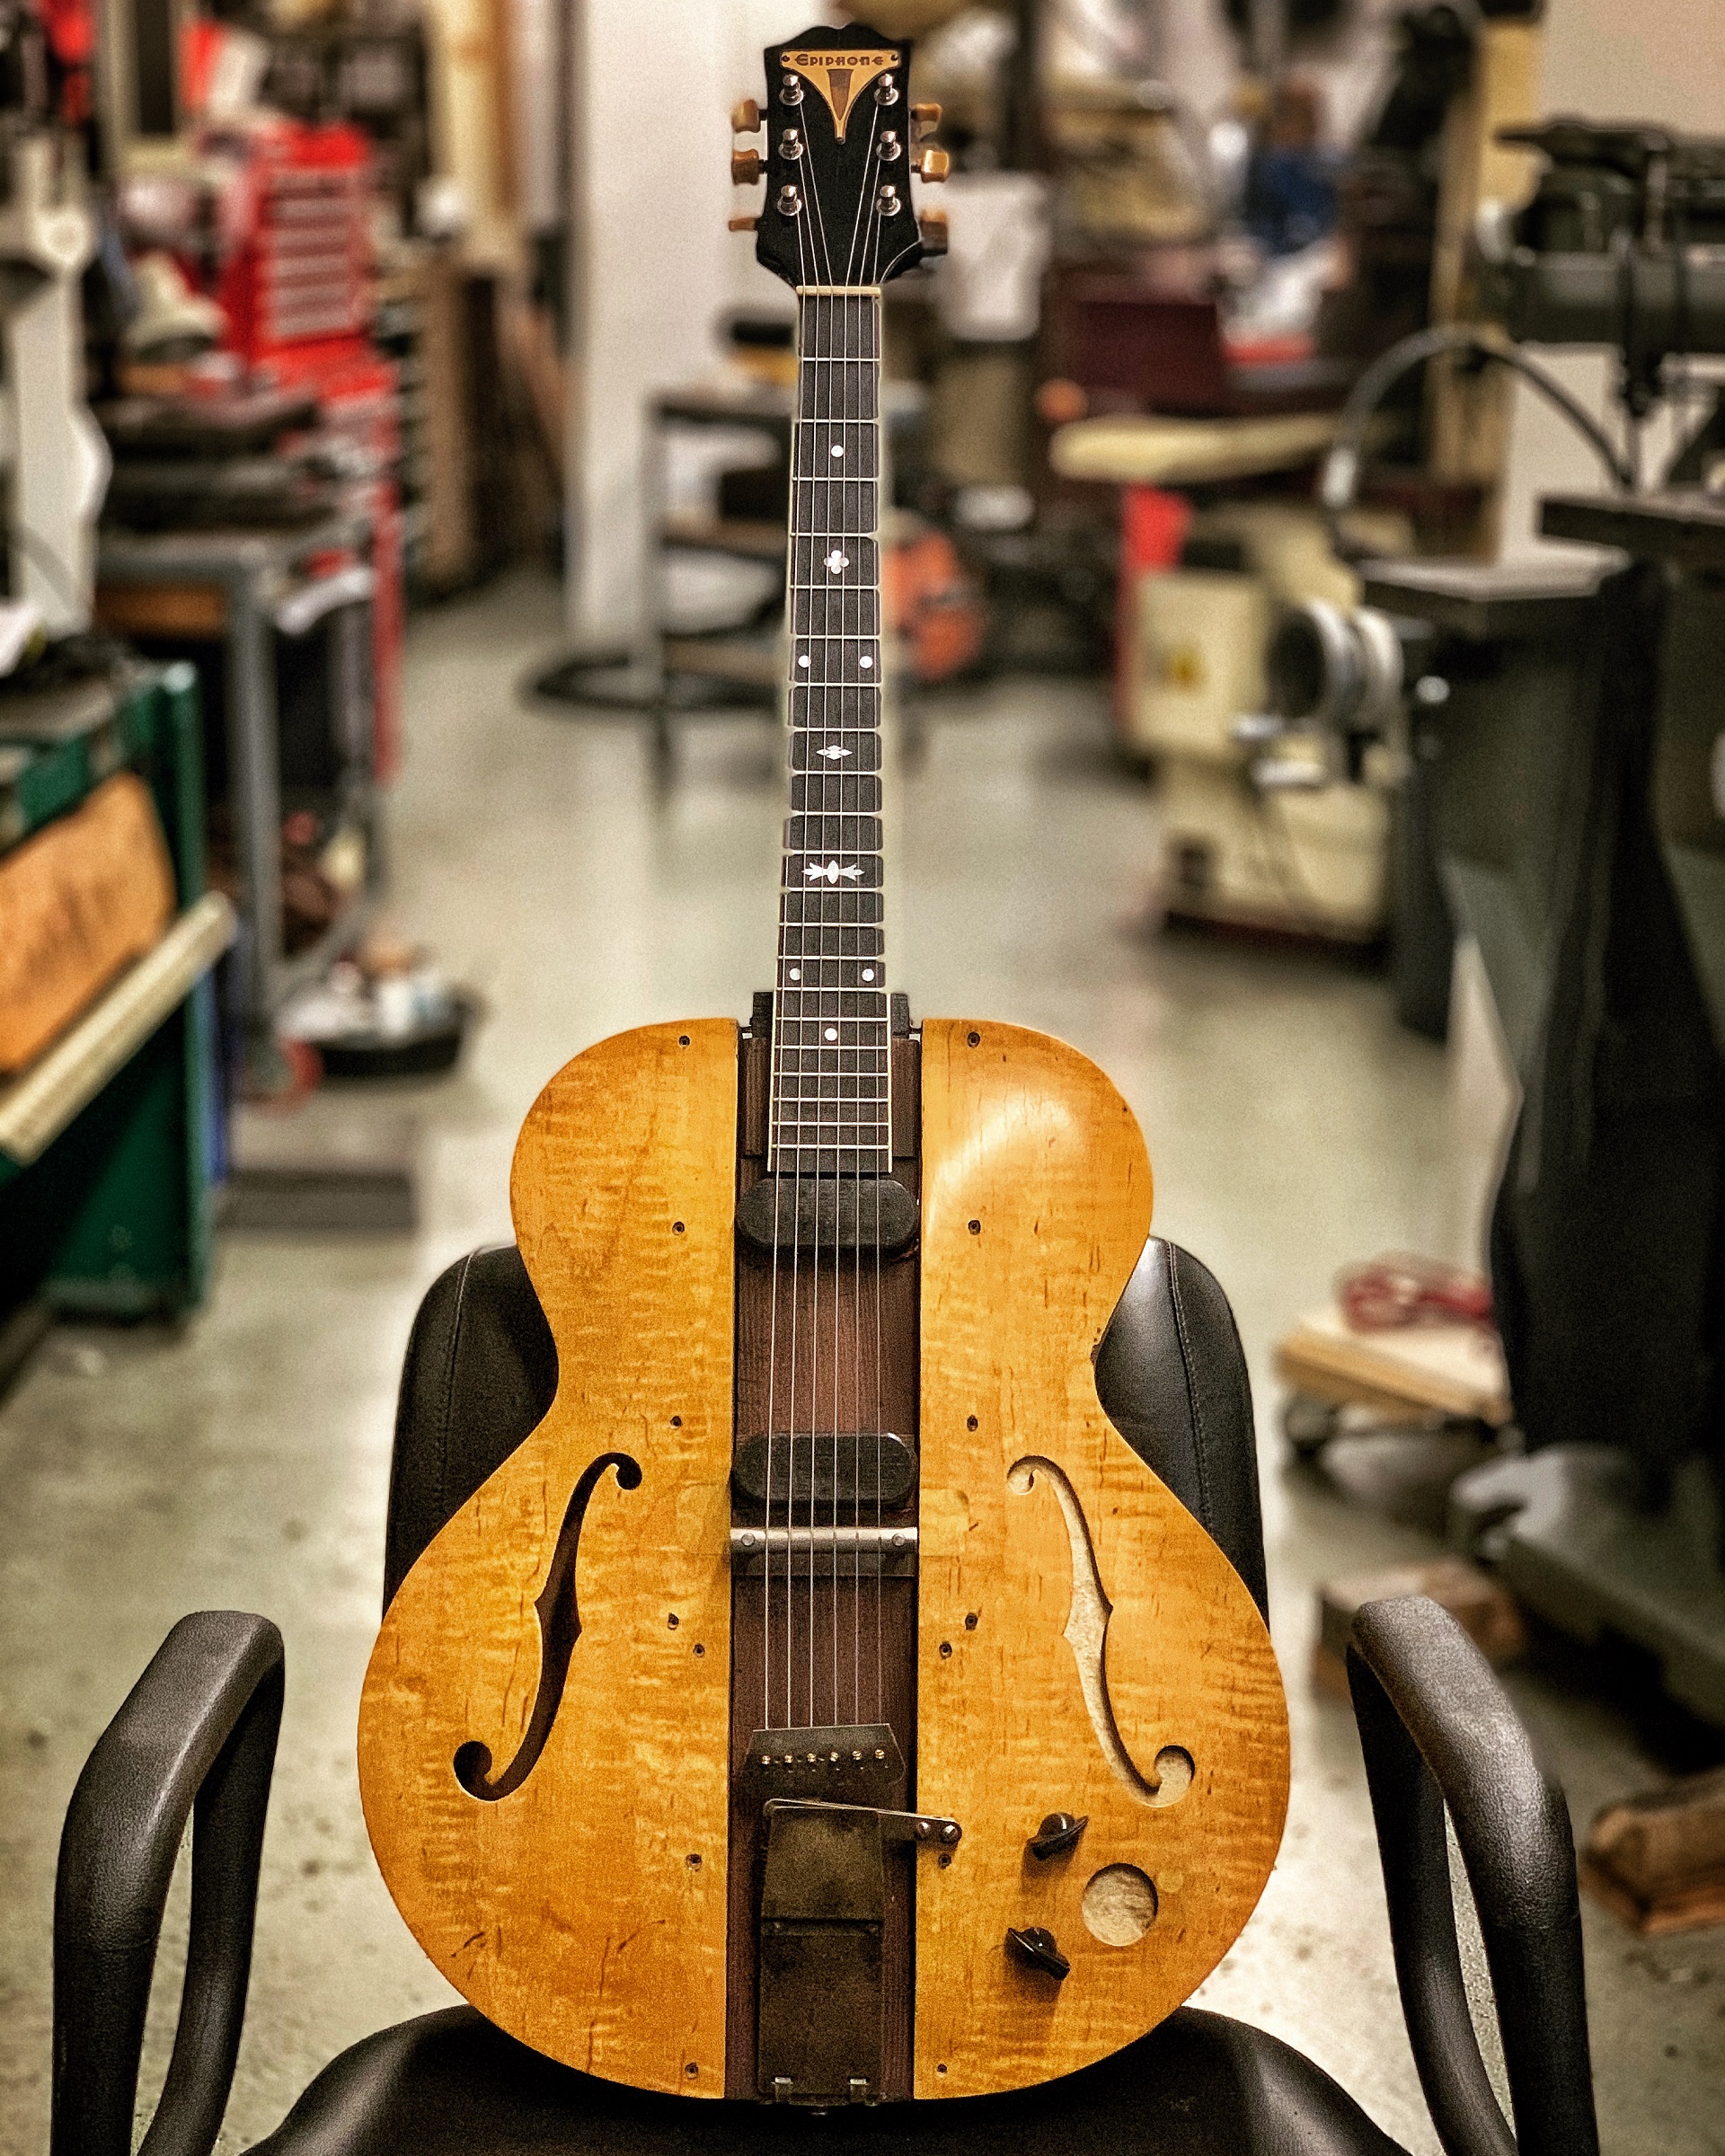 gibson, epiphone, les, paul, lester, polfus, solid, body, electric, guitar, log, broomstick, jazz, zephyr, 1940, archtop, arch, top, guitar, guitars, first, prototype, pickups, vibrato, kauffman, doc, clayton, c, o, co, vib-rolla, brass, vintage